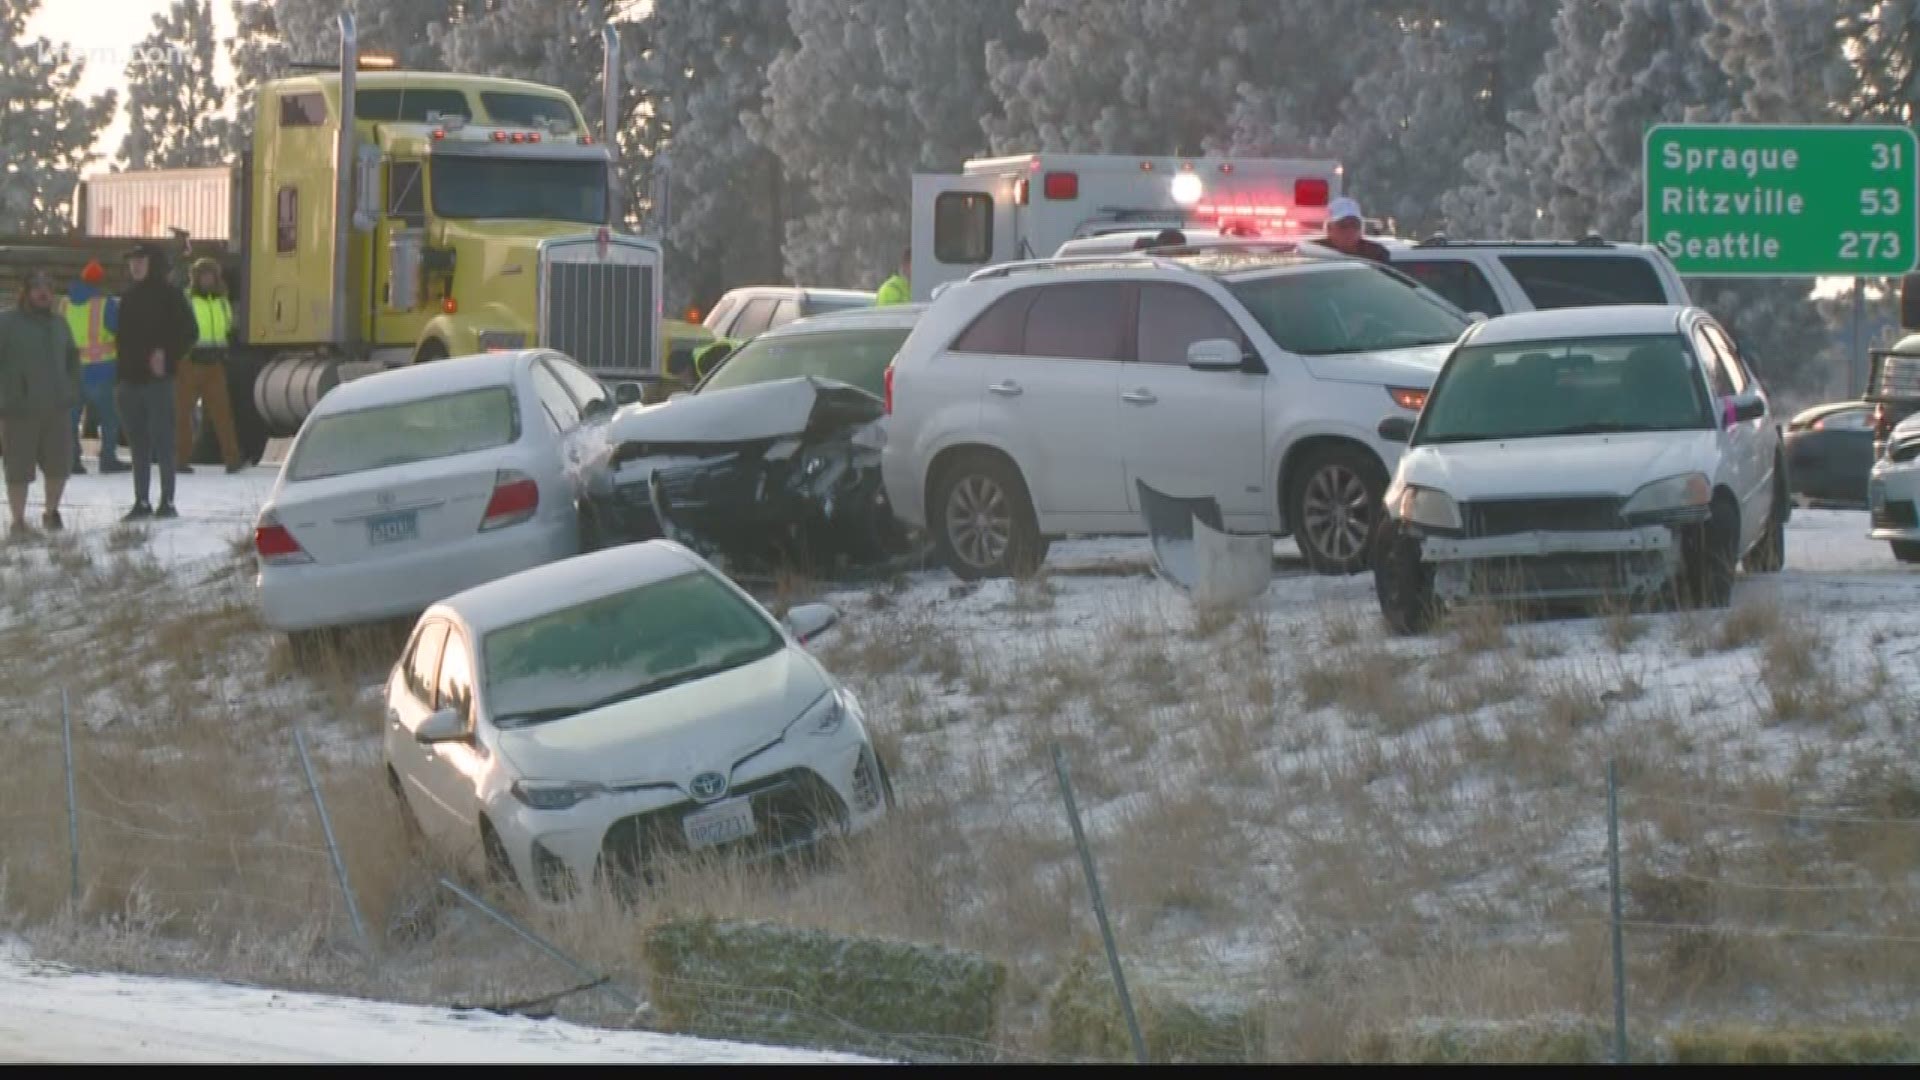 The accident was the largest in Spokane County history, the national weather service says.